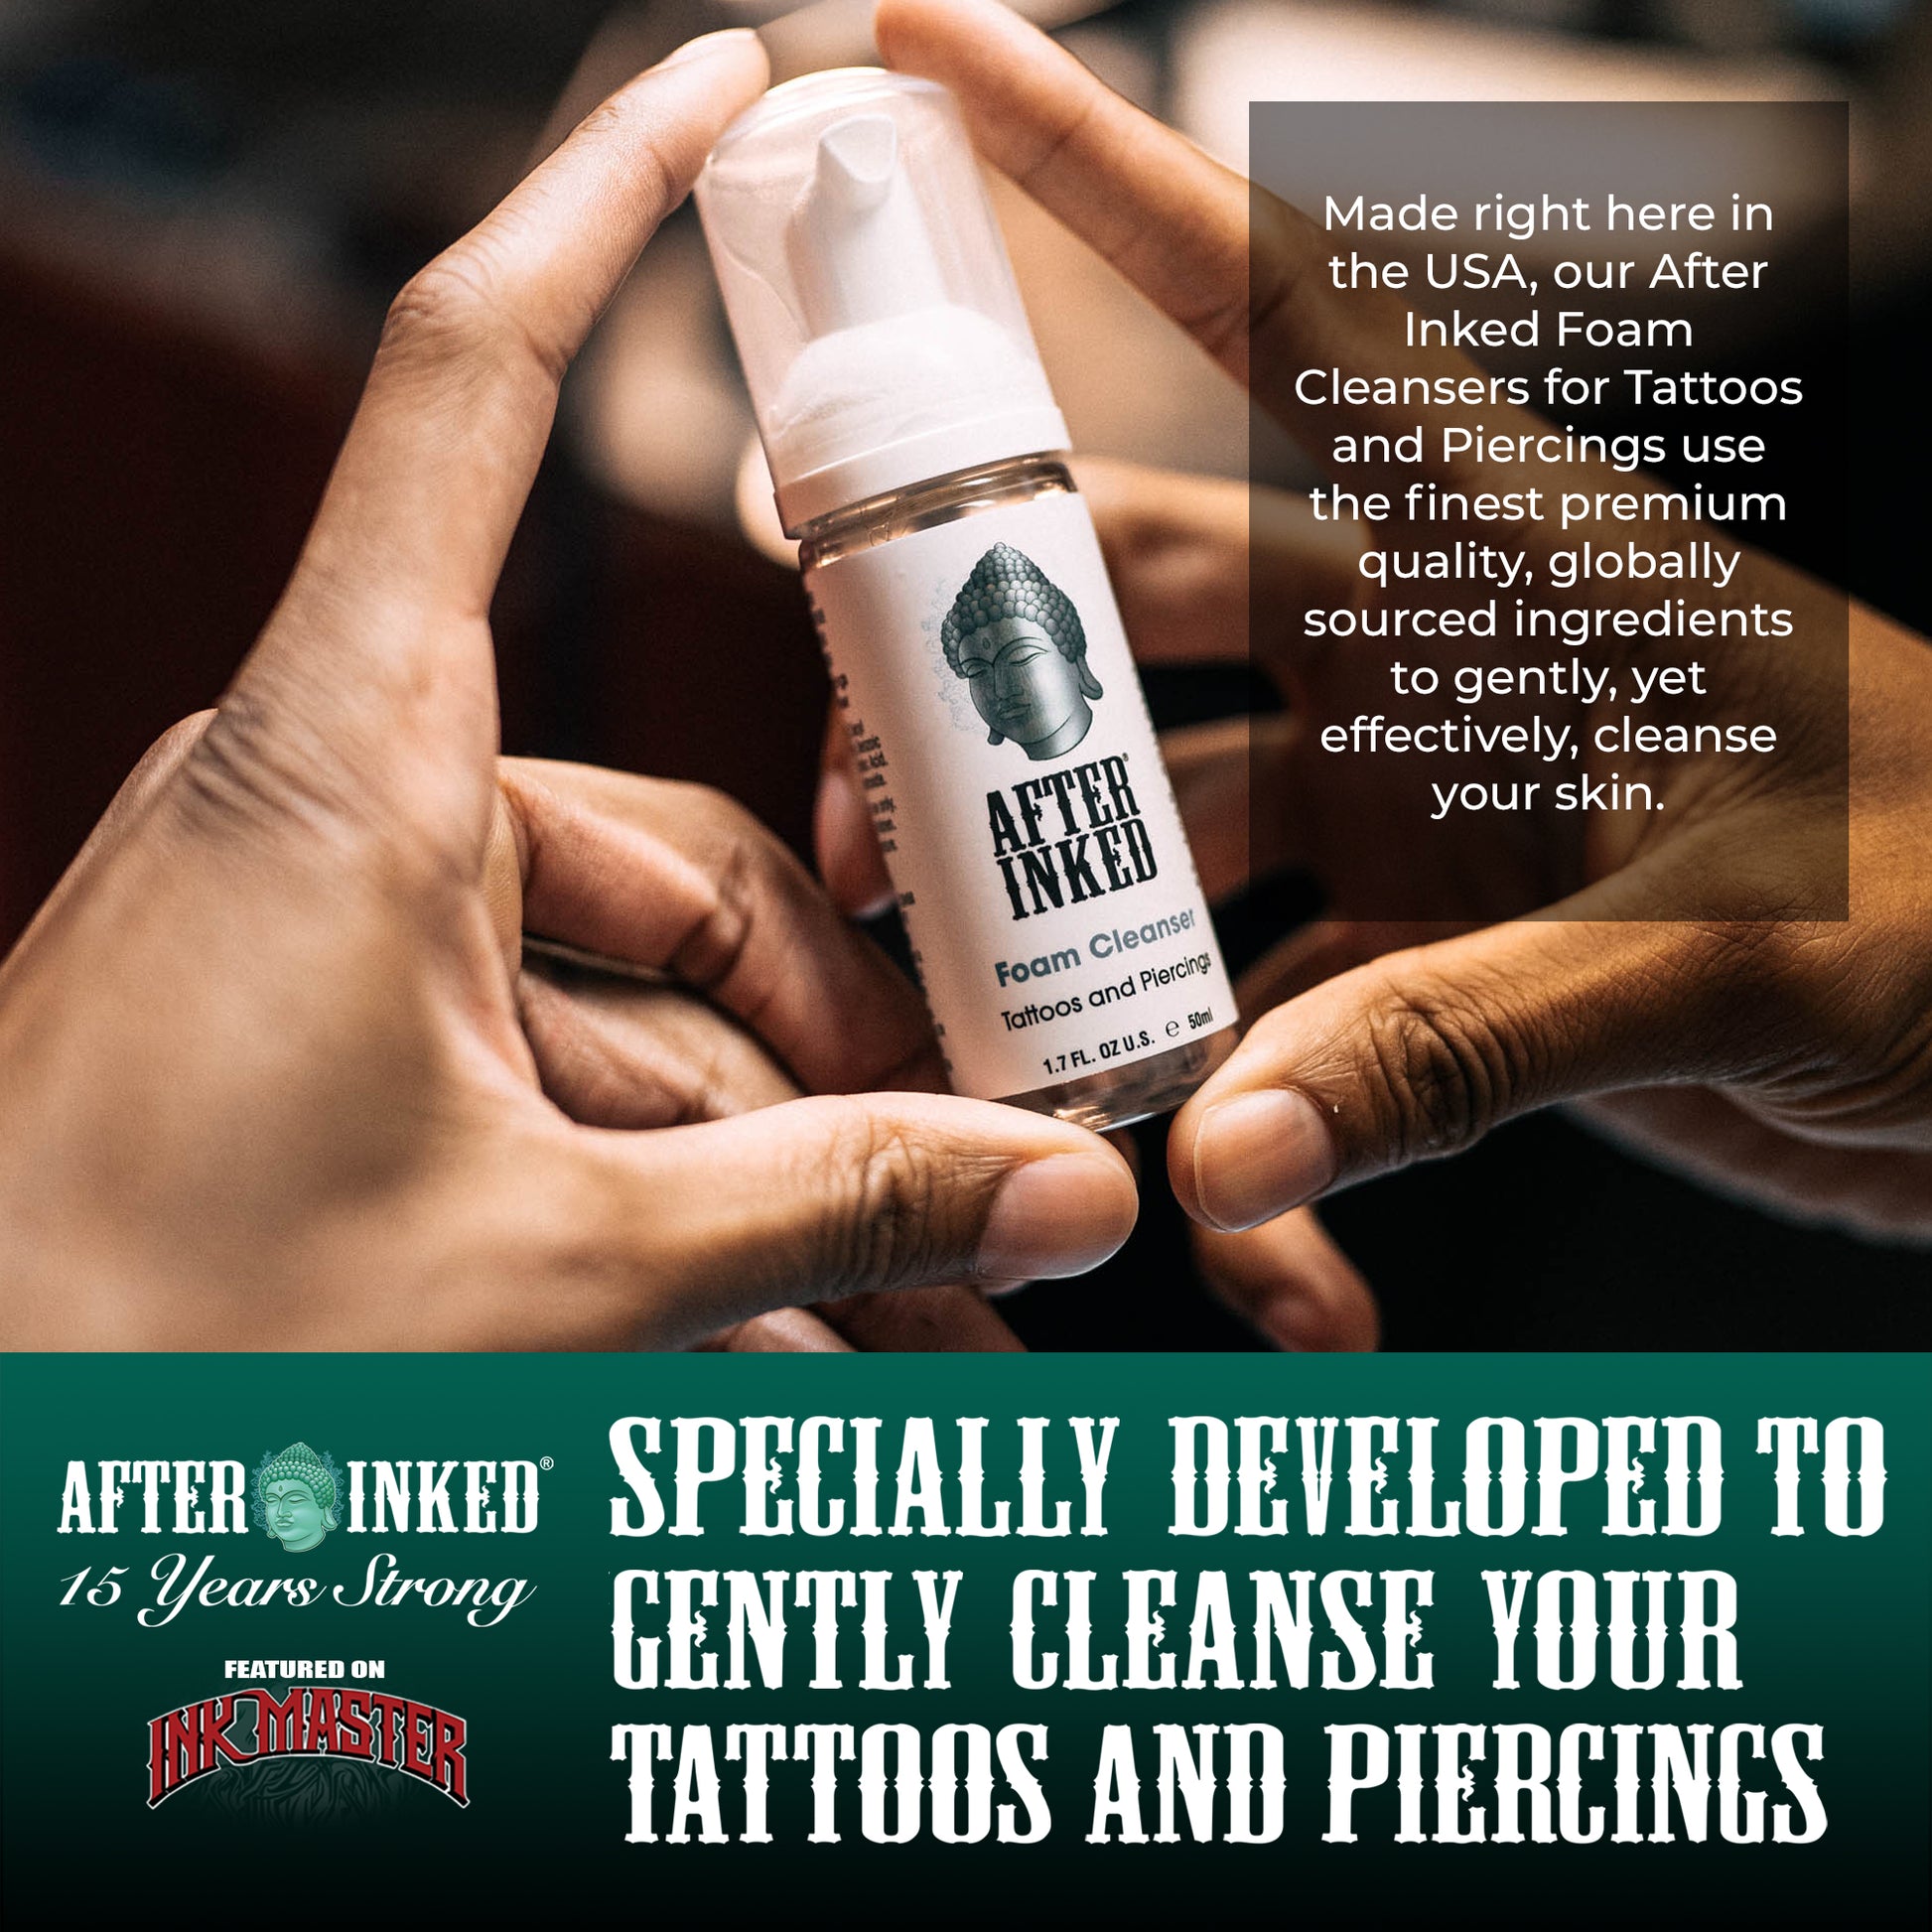 Made right here in the USA, our After Inked Foam Cleansers for Tattoos and Piercings use the finest premium quality, globally sourced ingredients to gently, yet effectively, cleanse your skin. Specially developed to gently cleanse your tattoos and piercings.